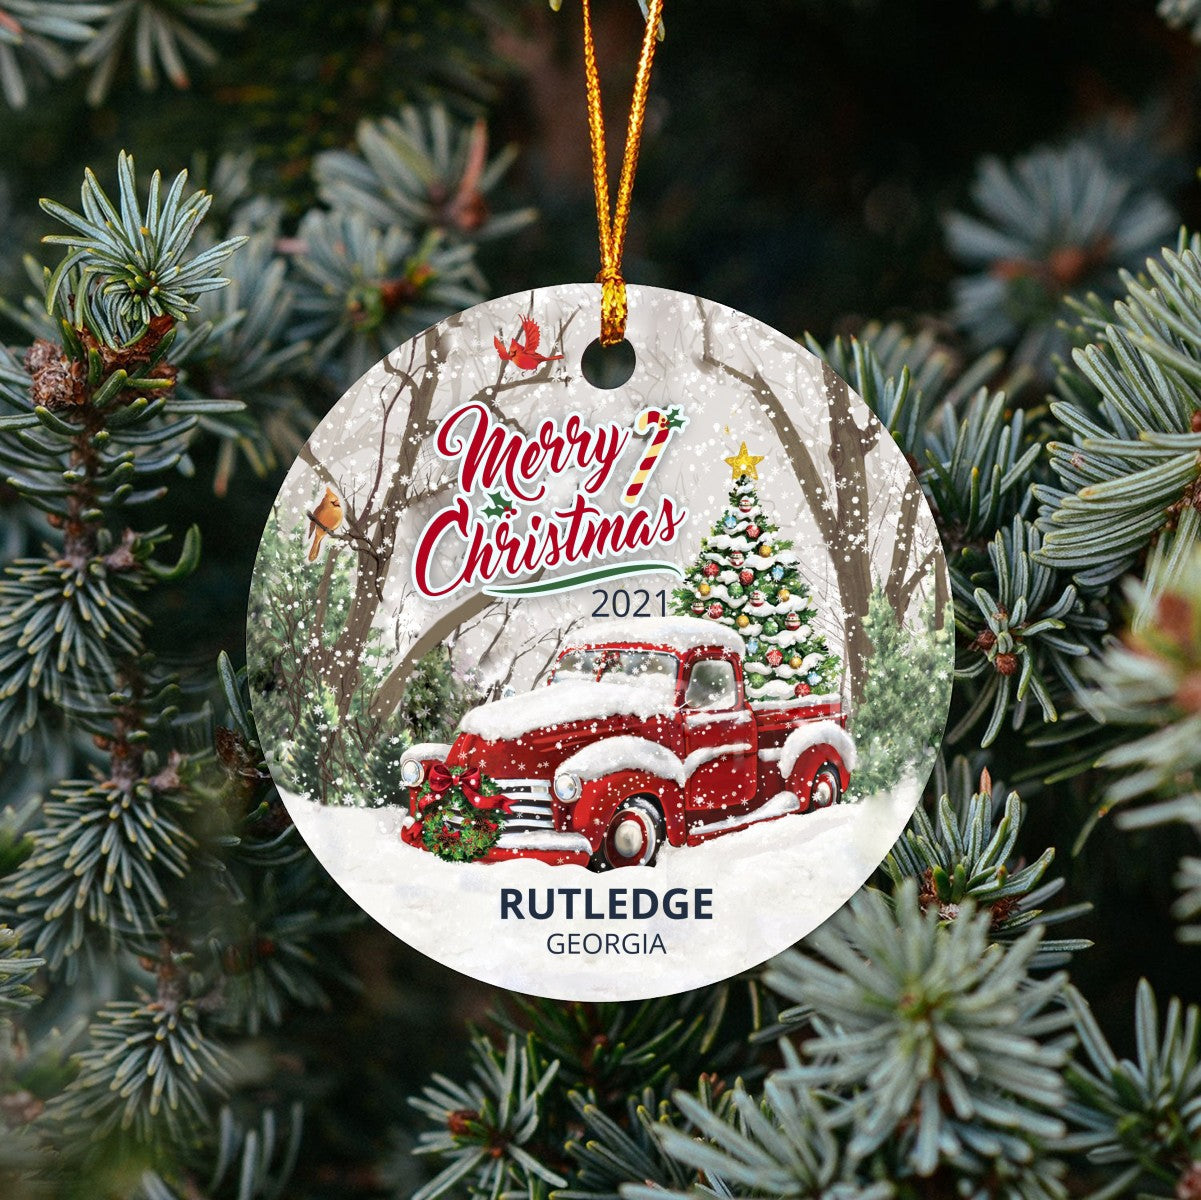 Christmas Tree Ornaments Rutledge - Ornament With Name City, State Rutledge Georgia GA Ornament - Red Truck Xmas Ornaments 3'' Plastic Gift For Family, Friend And Housewarming